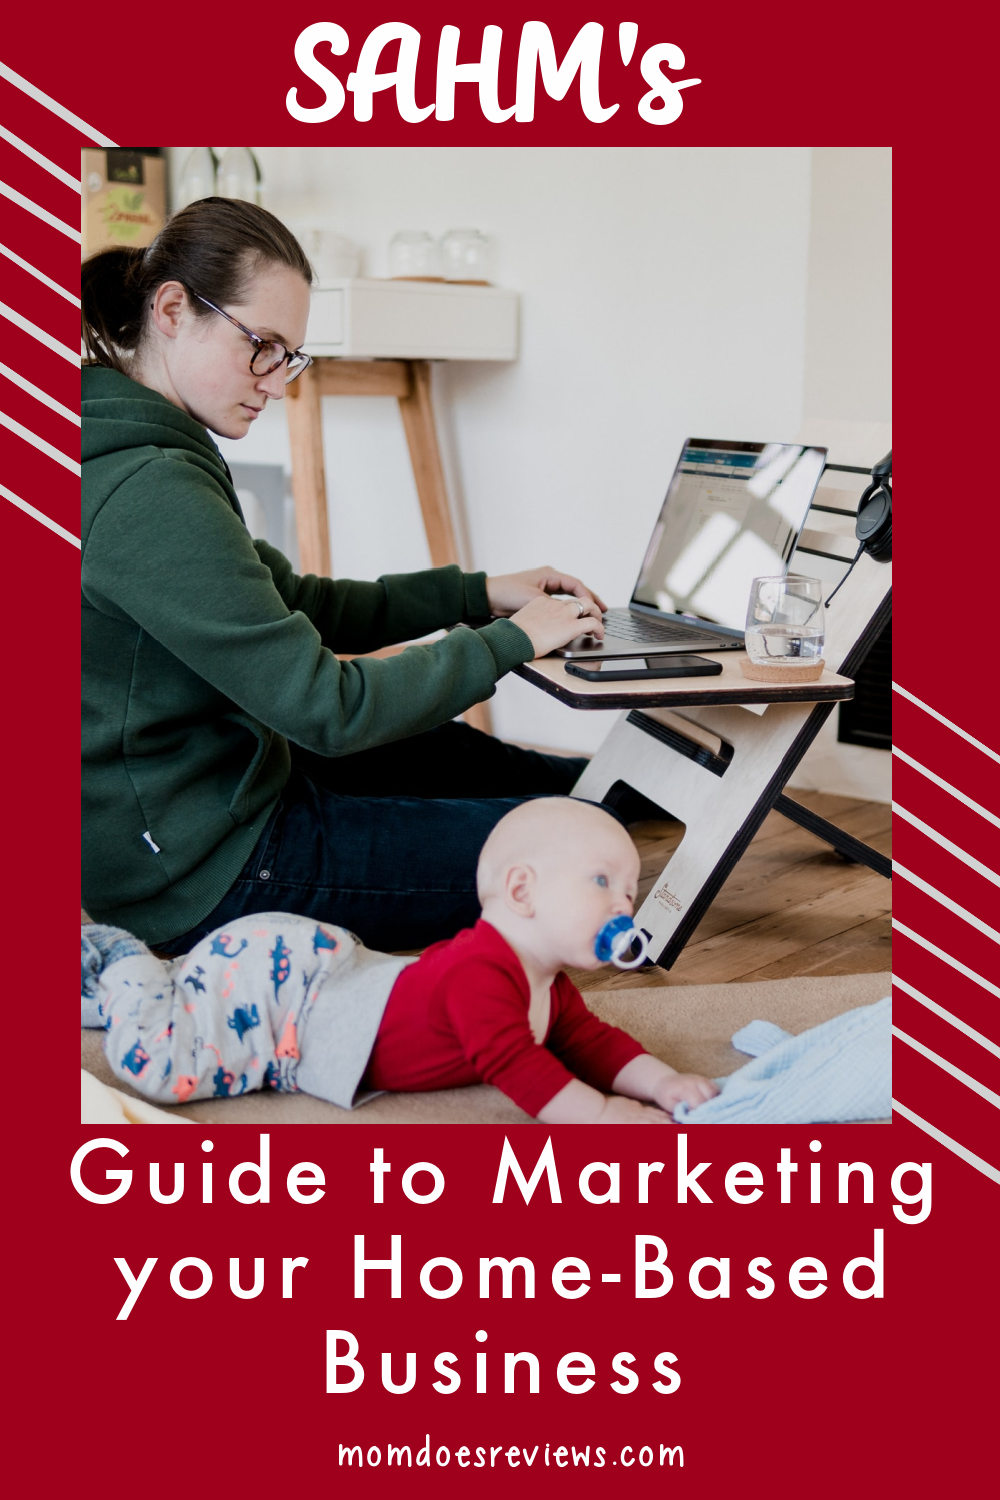 A Stay-at-Home Mom's Guide to Marketing Your Home-Based Business